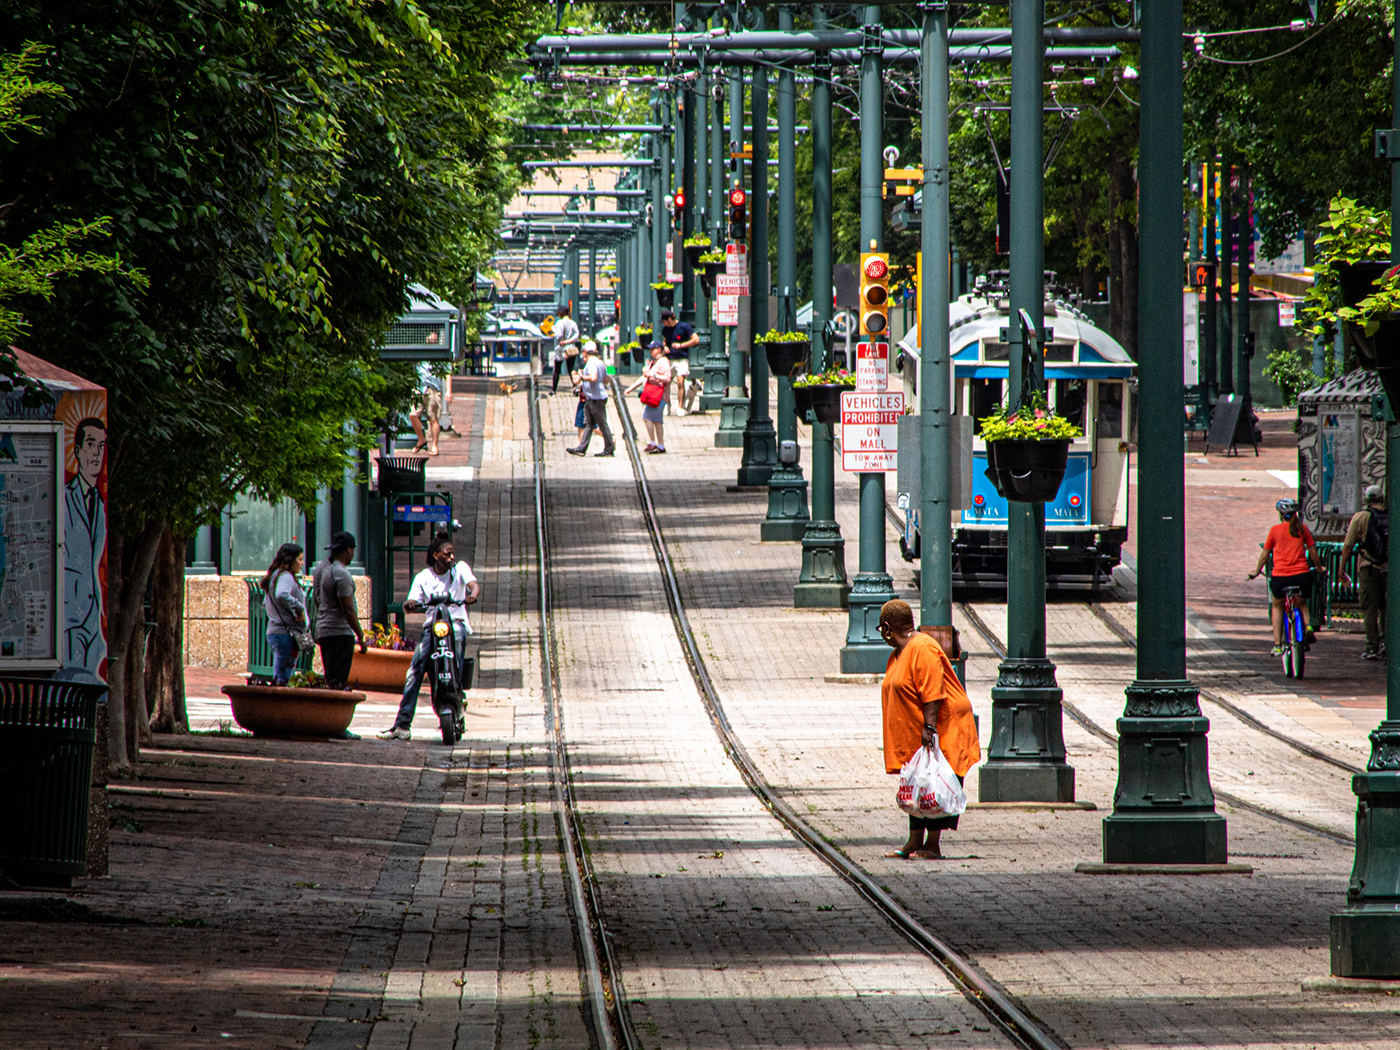 A woman checks the tracks before crossing over them in downtown Memphis, TN.